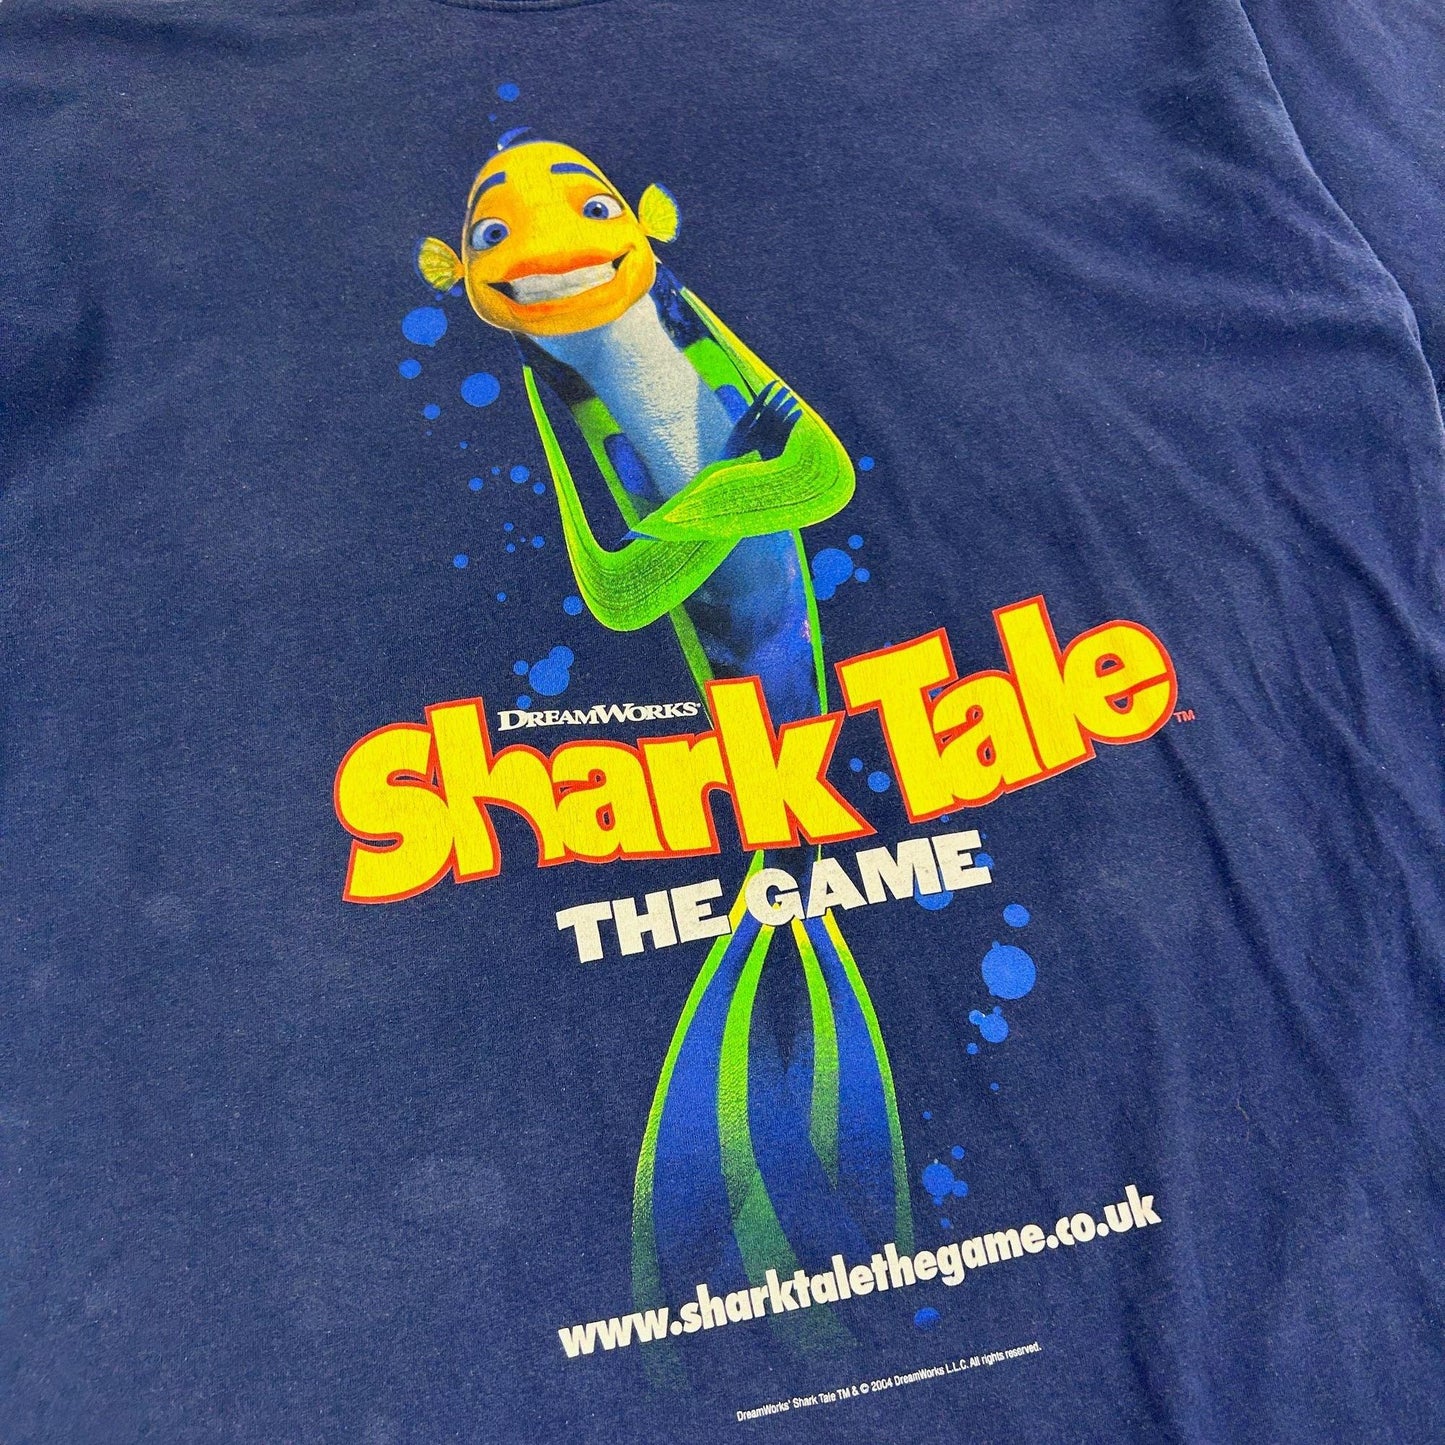 Vintage Shark Tale The Game Graphic T-Shirt Size XL - Known Source